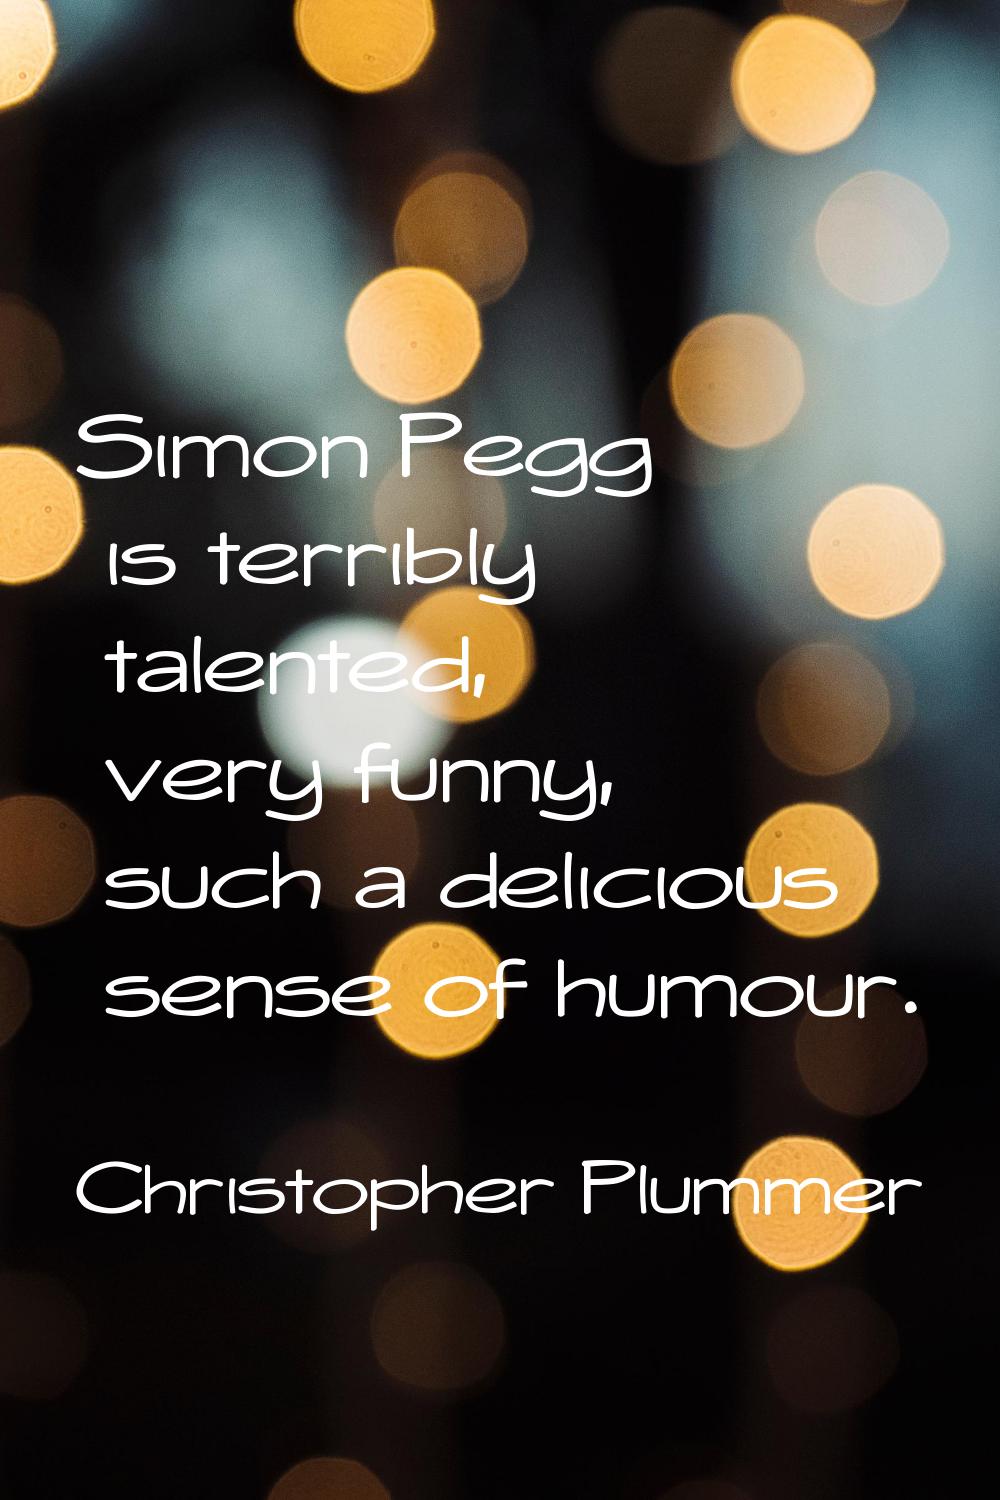 Simon Pegg is terribly talented, very funny, such a delicious sense of humour.